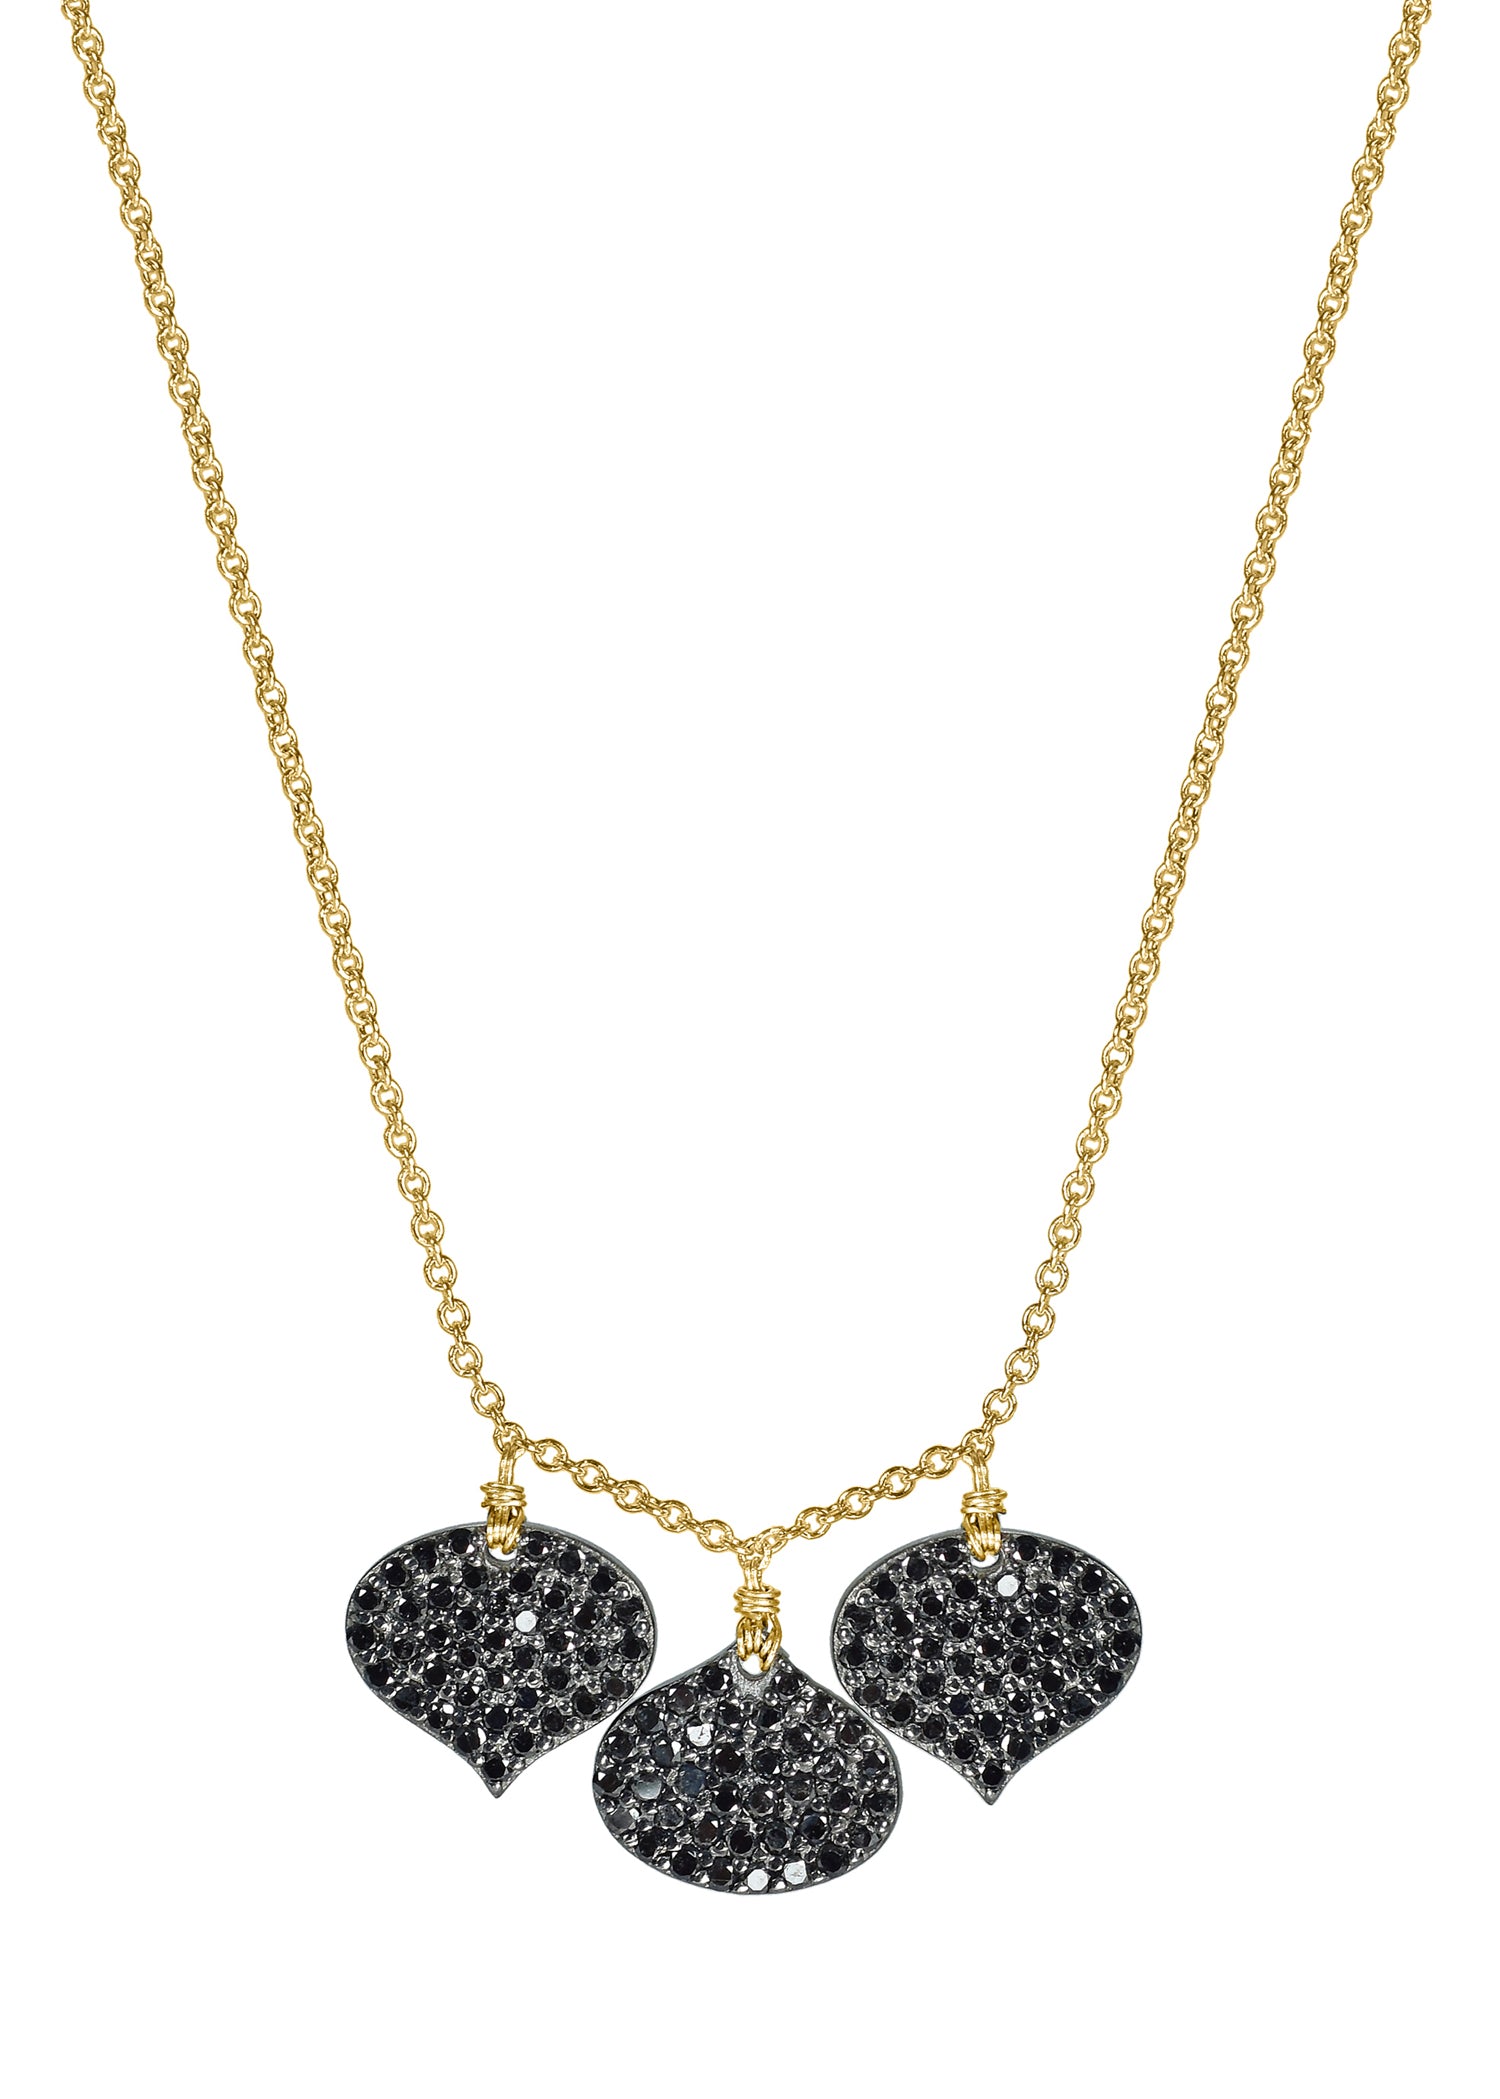 Black diamond 14k gold Sterling silver Mixed metal Special order only Necklace measures 16" in length Pendants measure 3/8" in length and 7/16" in width at the widest point (x3) Handmade in our Los Angeles studio